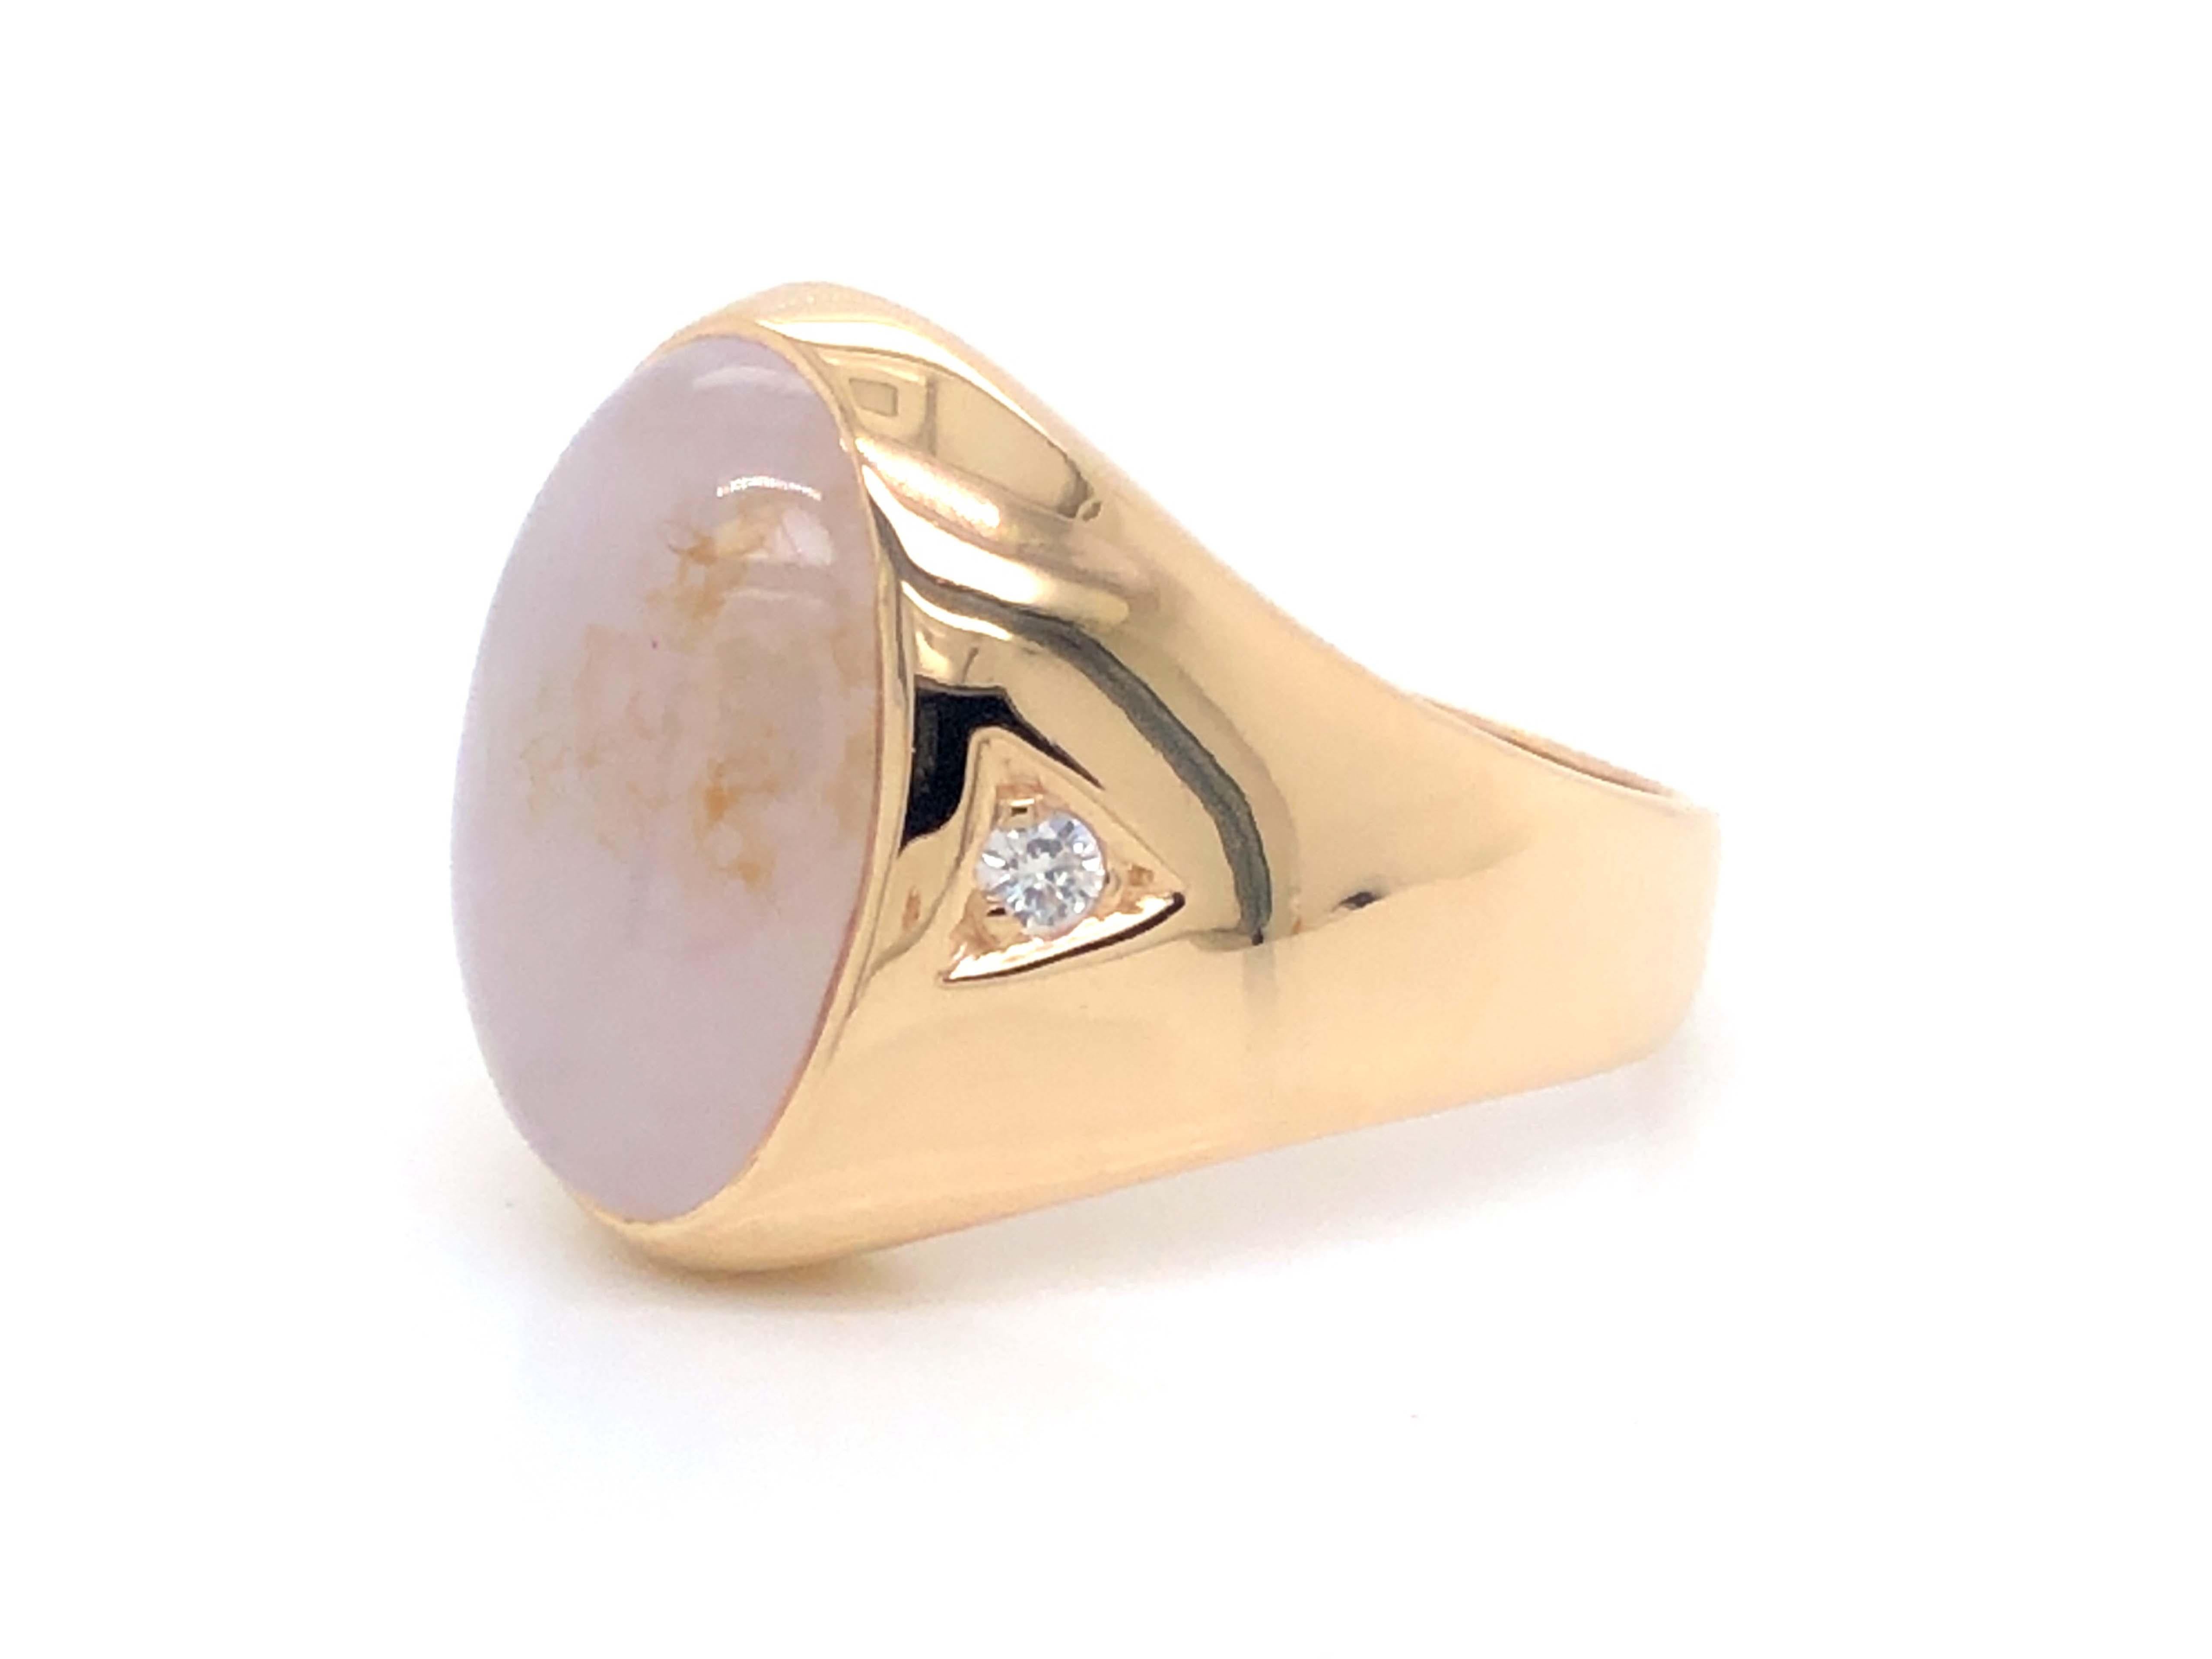 Modern Men's Oval White Jade and Diamond Ring - 14k Yellow Gold For Sale